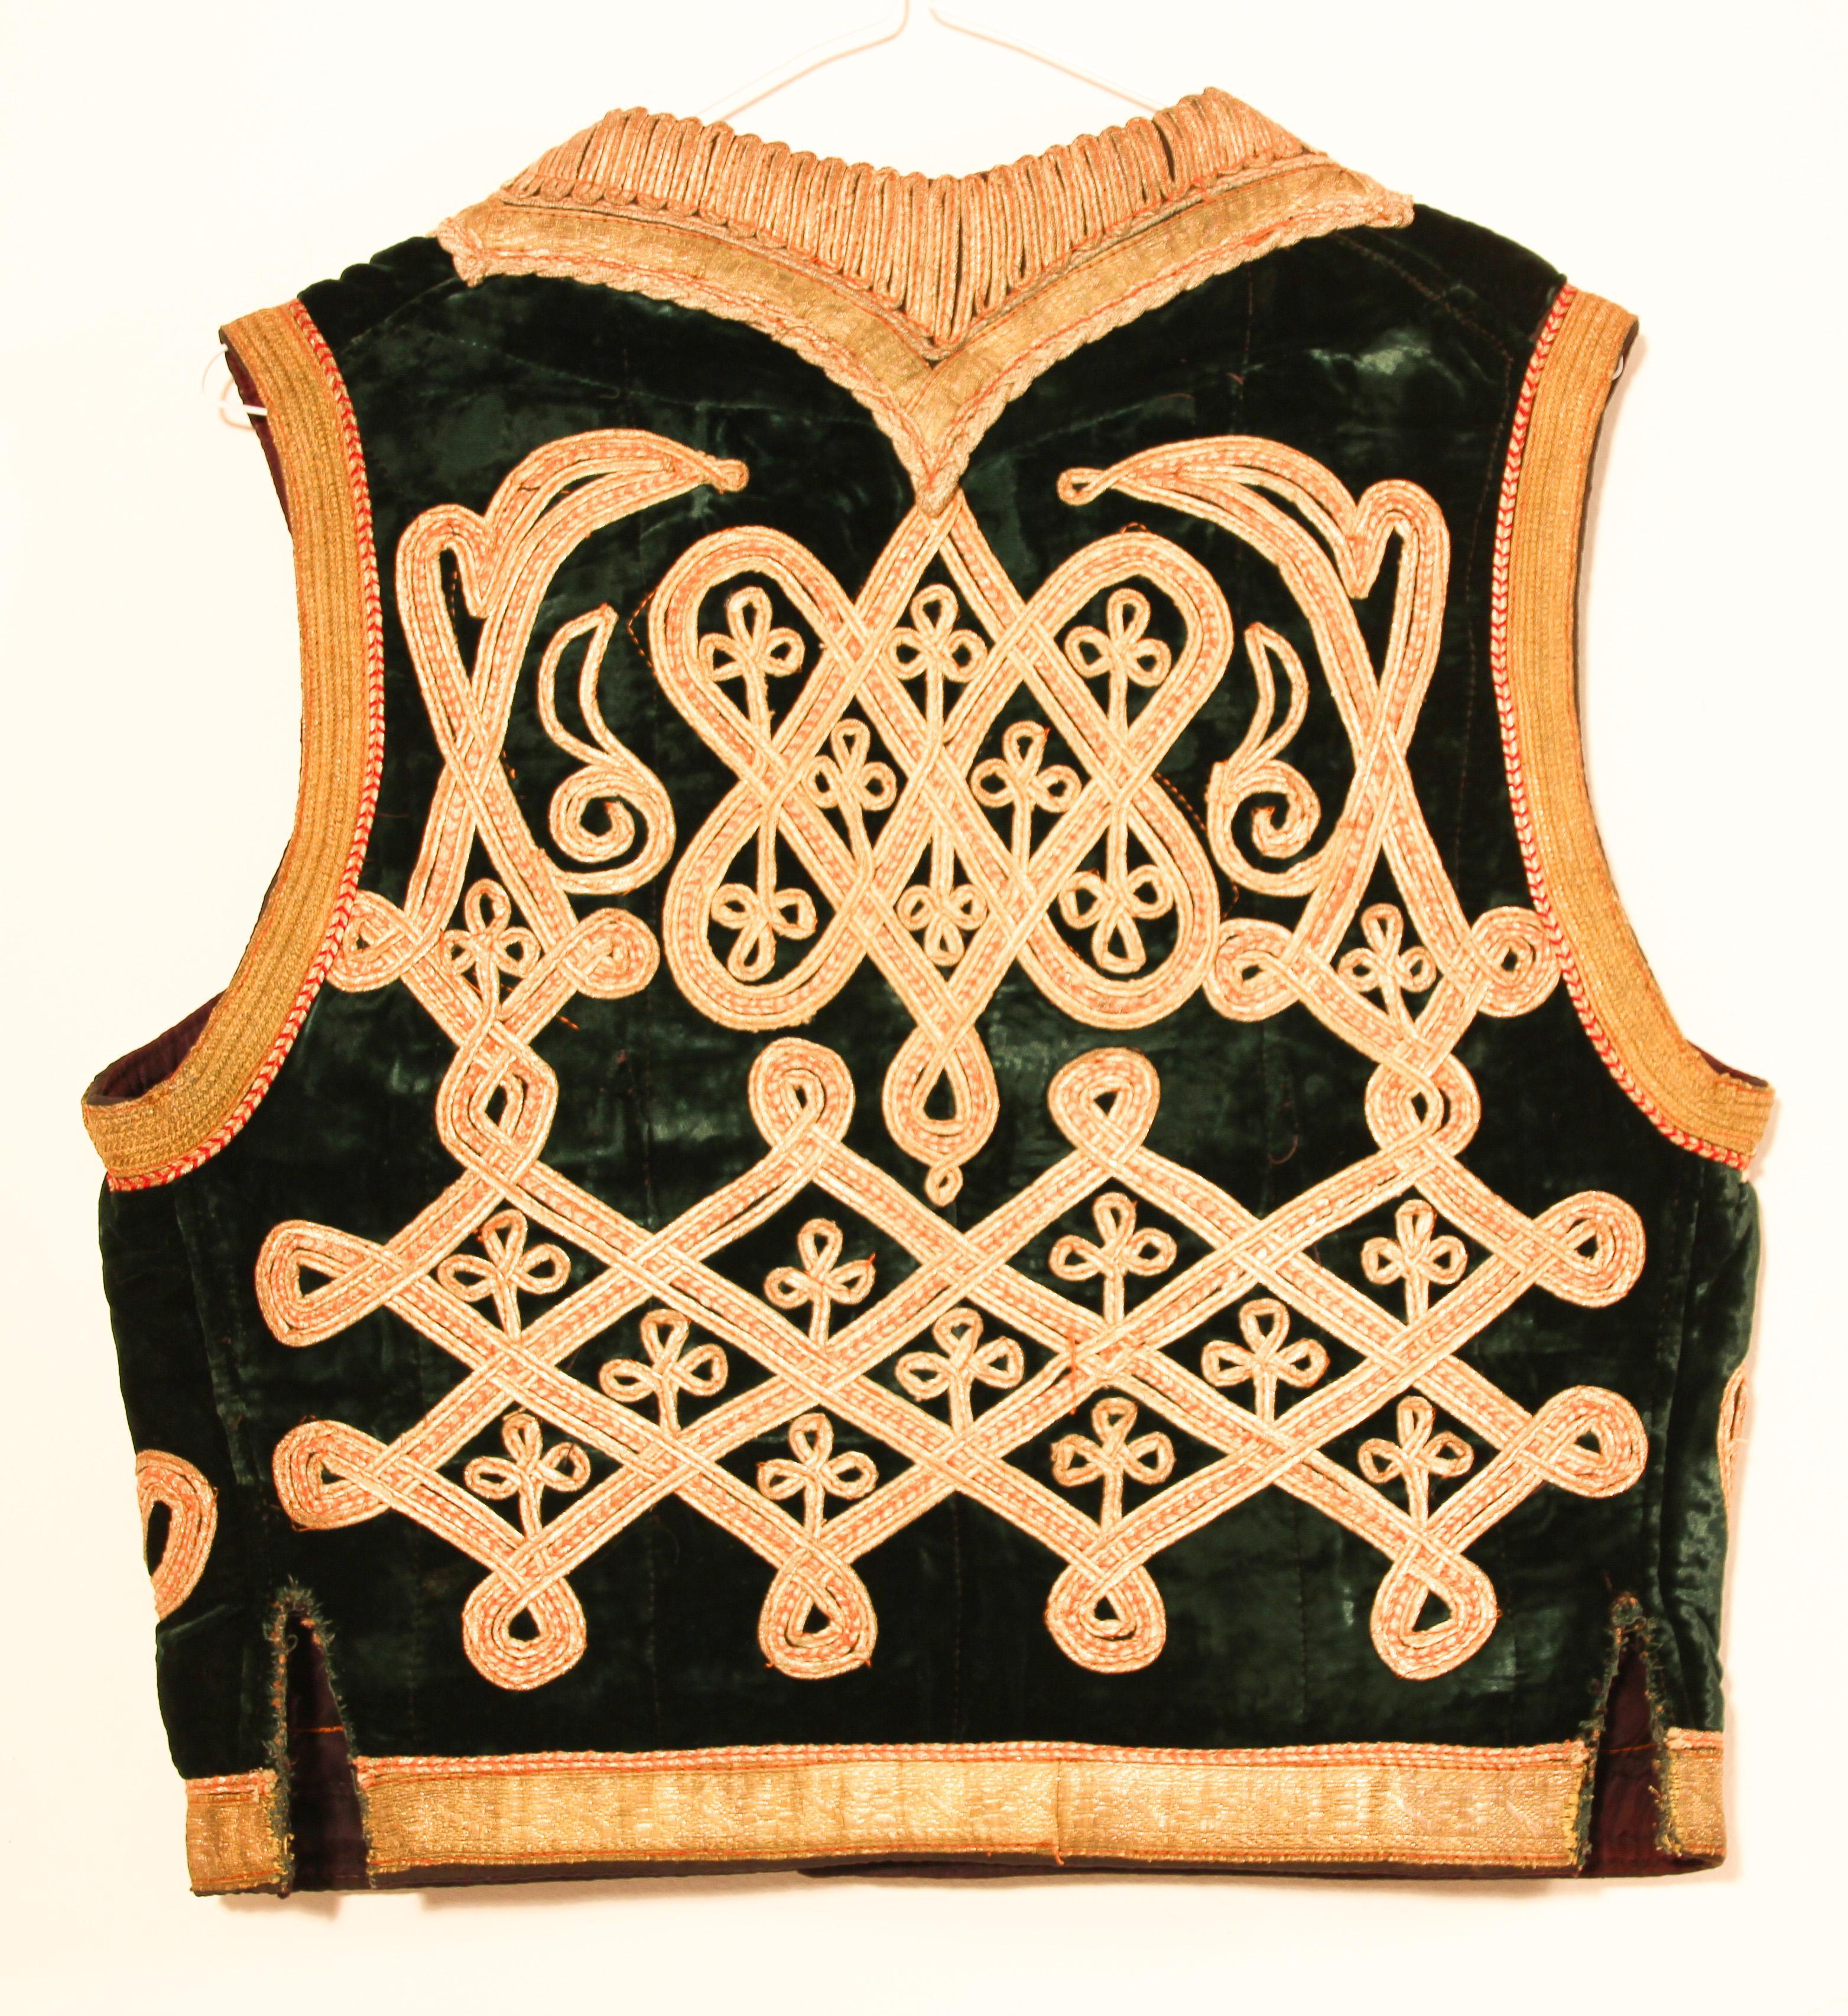 Antique Asian Ottoman style vest in emerald green velvet decorated with elaborate gold thread, trimmed with gold metallic thread.
Elegant vest handmade embroidery on green silk velvet, fully lined.
This antique authentic bolero vest is part of the